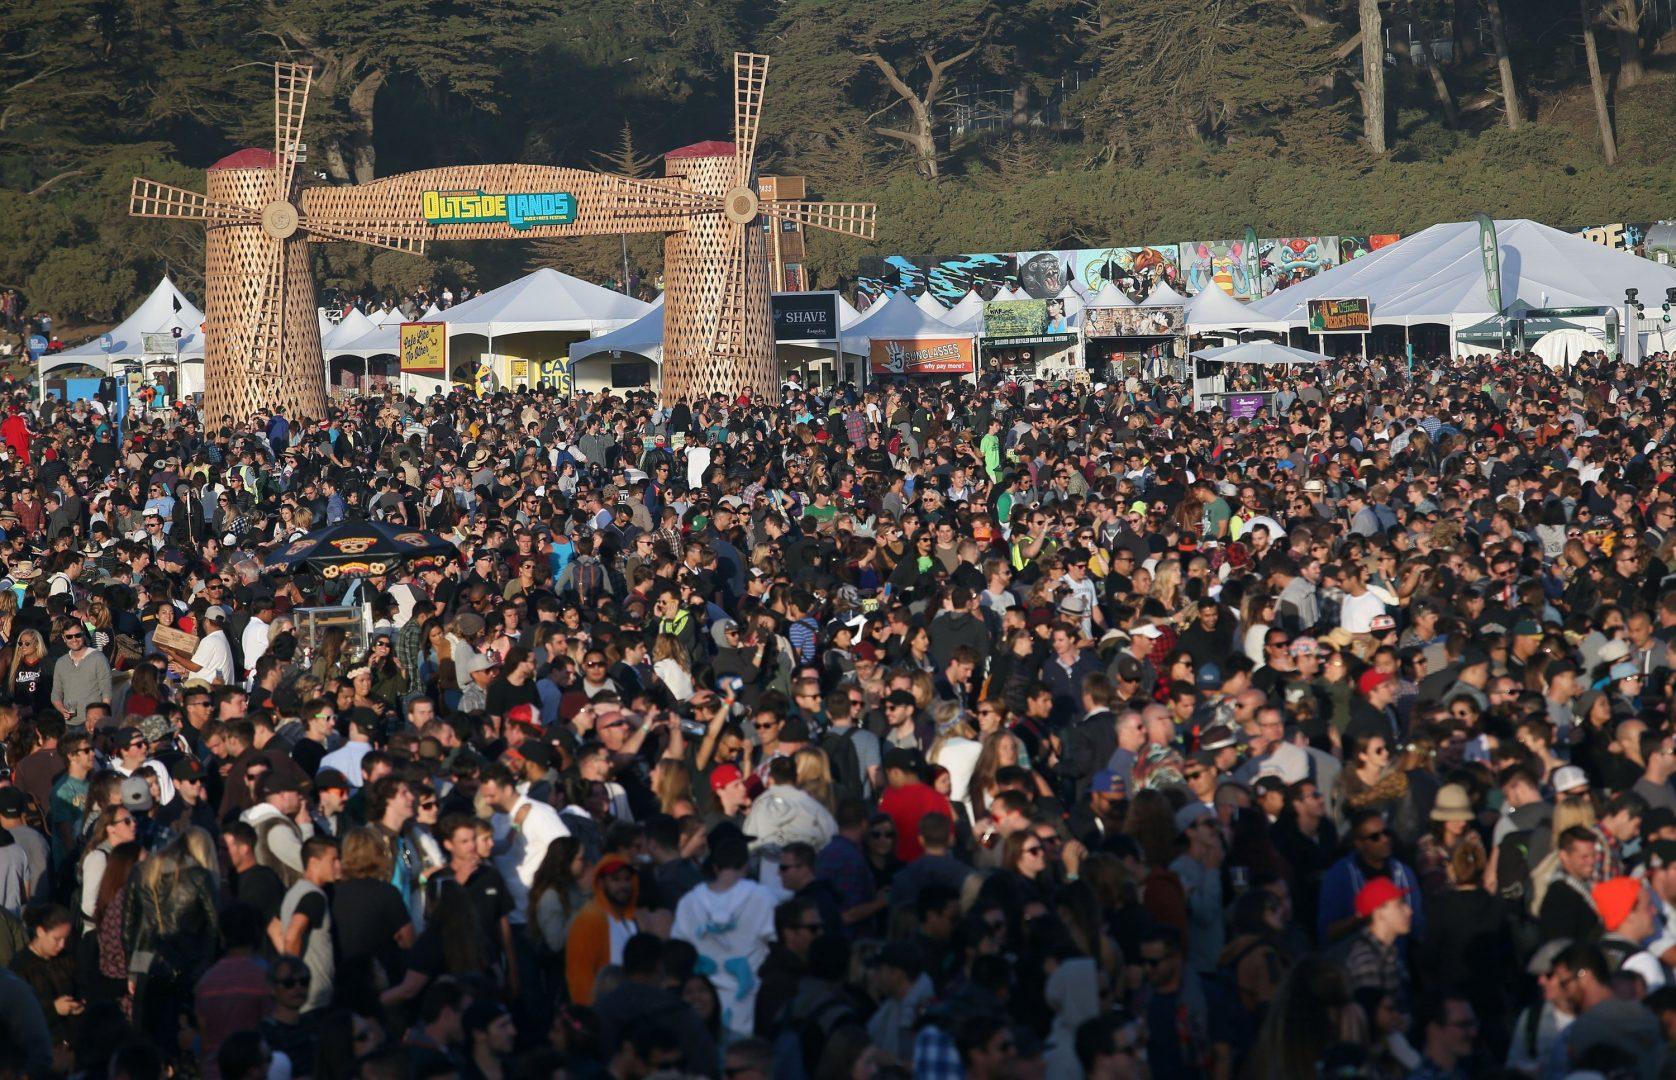 A+view+of+the+crowd+at+the+Land%E2%80%99s+End+stage+during+day+one+of+the+Outside+Lands+music+festival+at+Golden+Gate+Park+on+August+8%2C+2014.+The+festival+runs+through+Sunday.++%0AJane+Tyska%2FBay+Area+News+Group%2FTNS